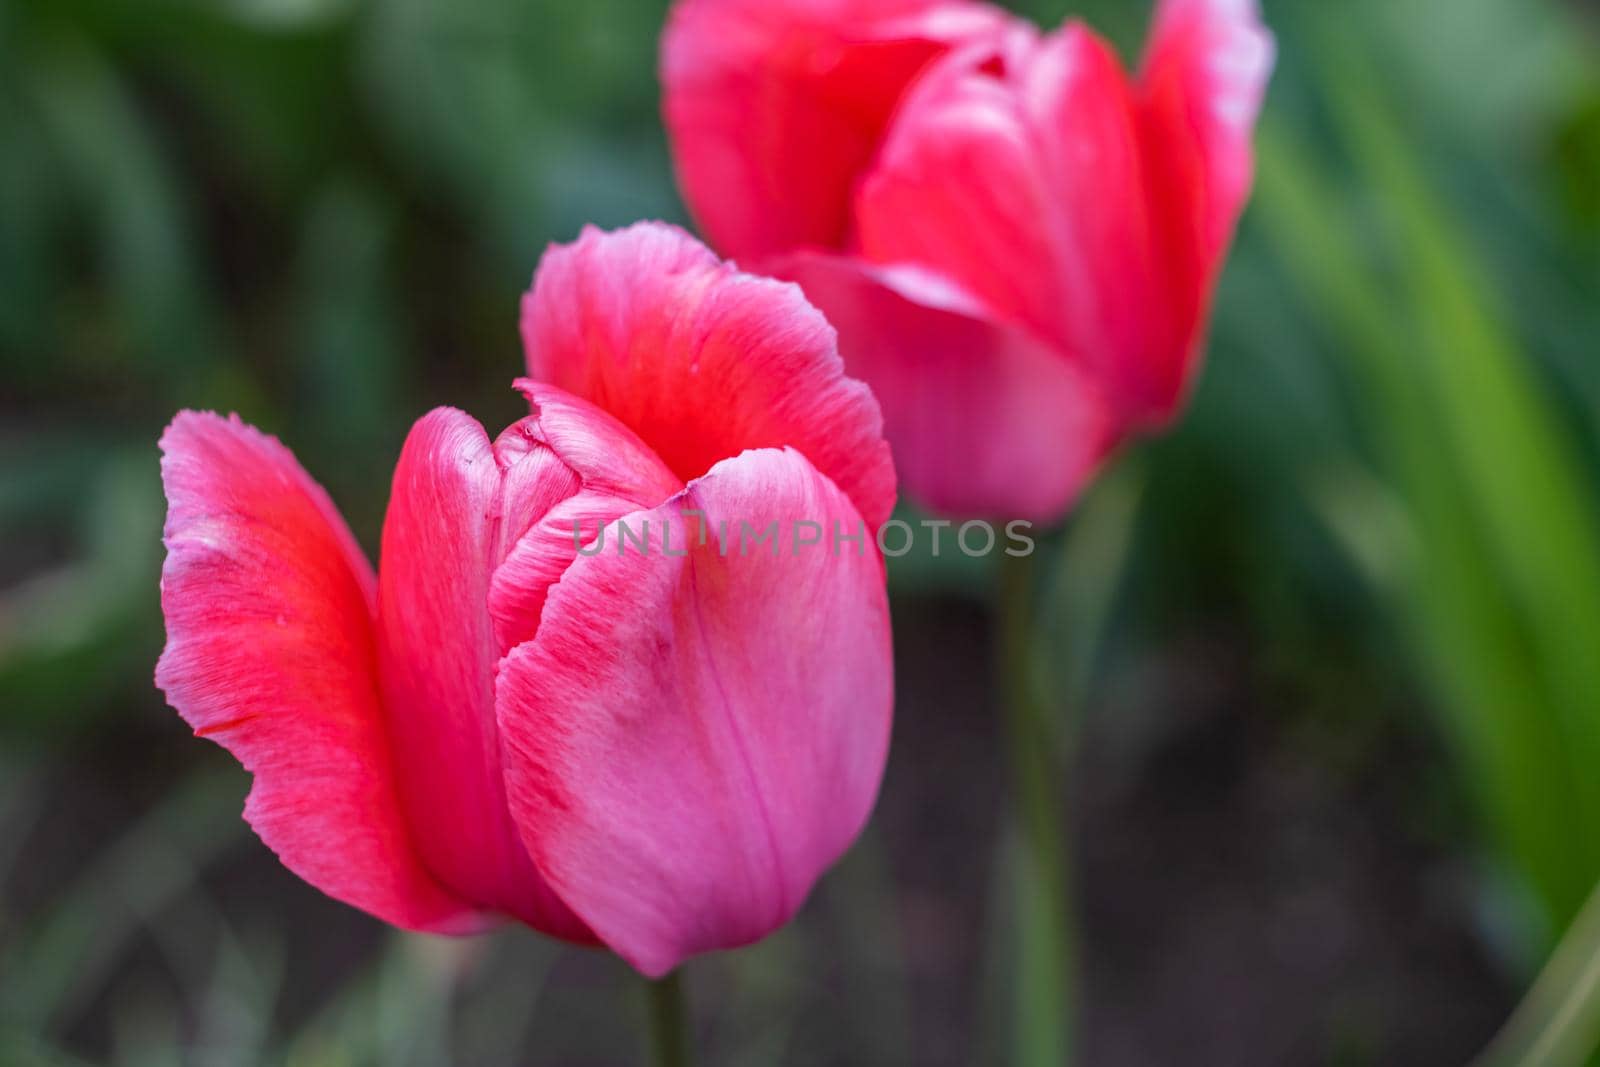 Pink tulips against the backdrop of greenery by Vera1703